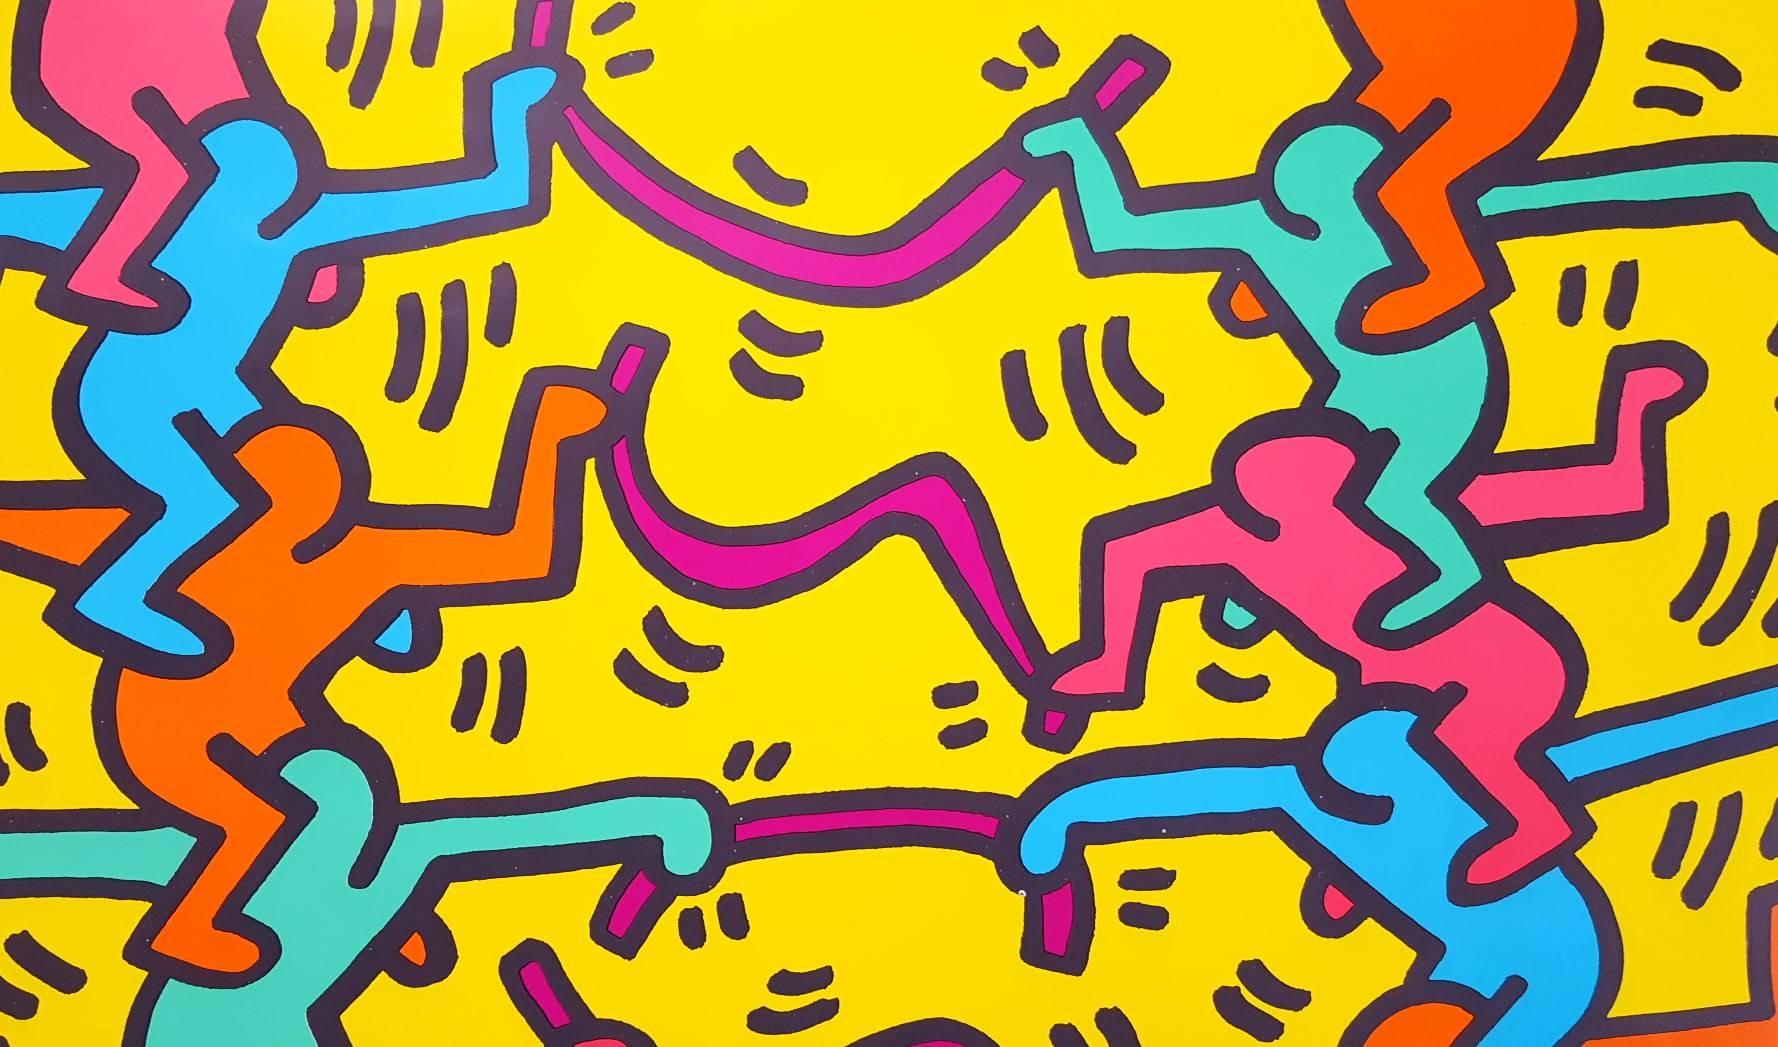 Keith Haring for Emporium Capwell 3